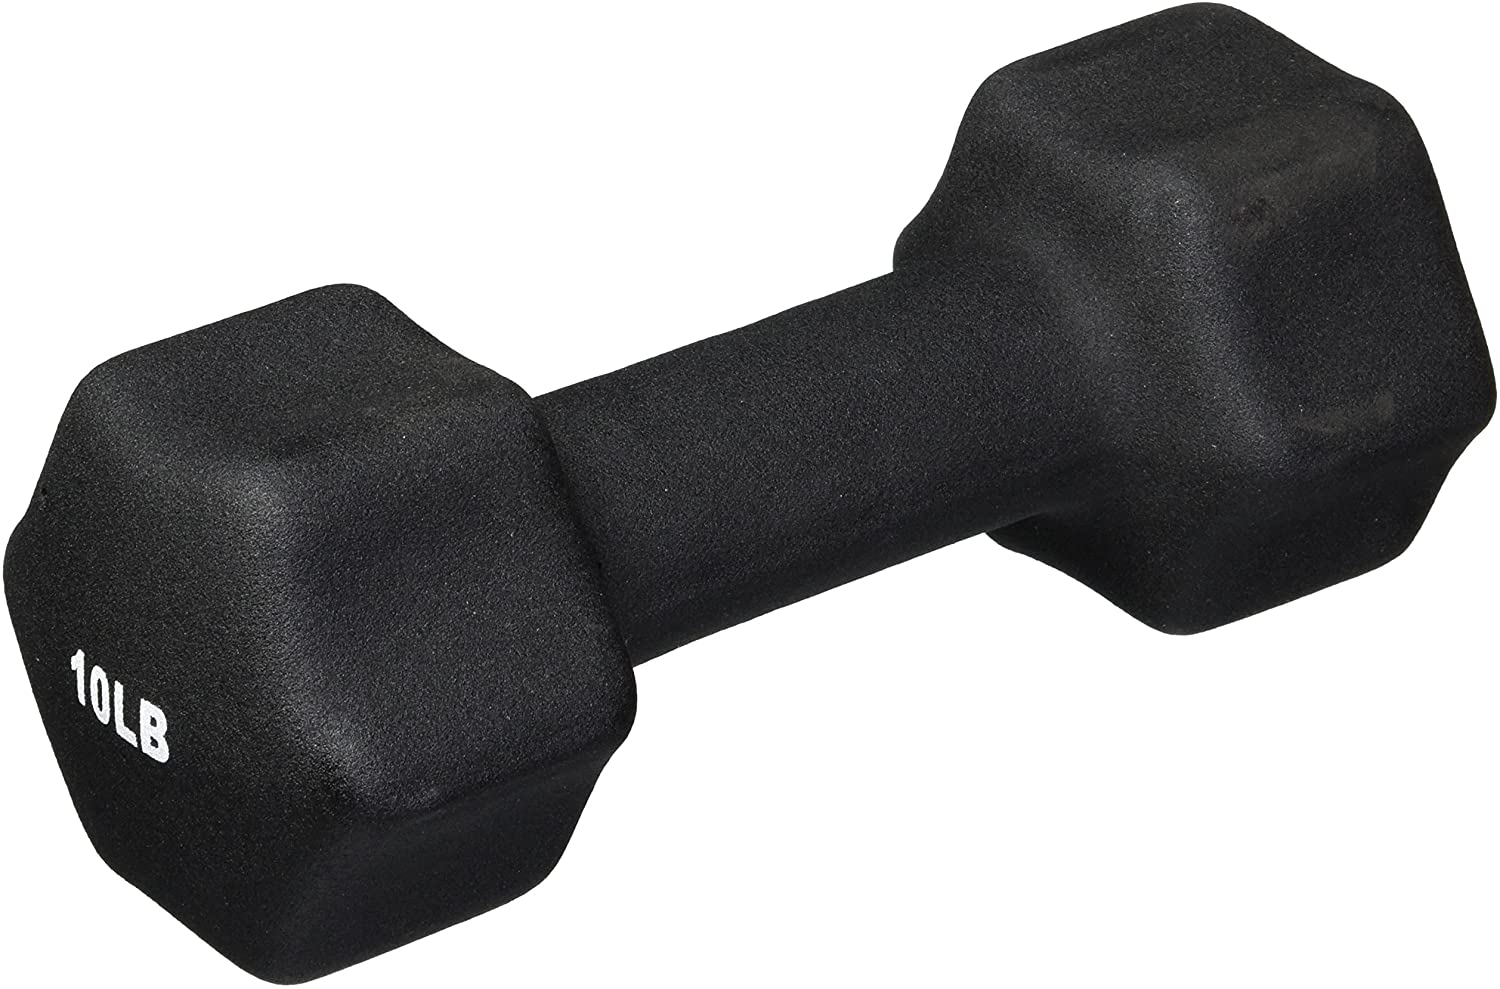 Sammons Preston Vinyl-Coated Iron Dumbbells, 10-Pound, Pair, Soft Easy-Grip Dumbbell Weights for Strength Training, Muscle Toning, Body Rehabiliaiton, and Physical Therapy, Home, Gym, and Clinical Use